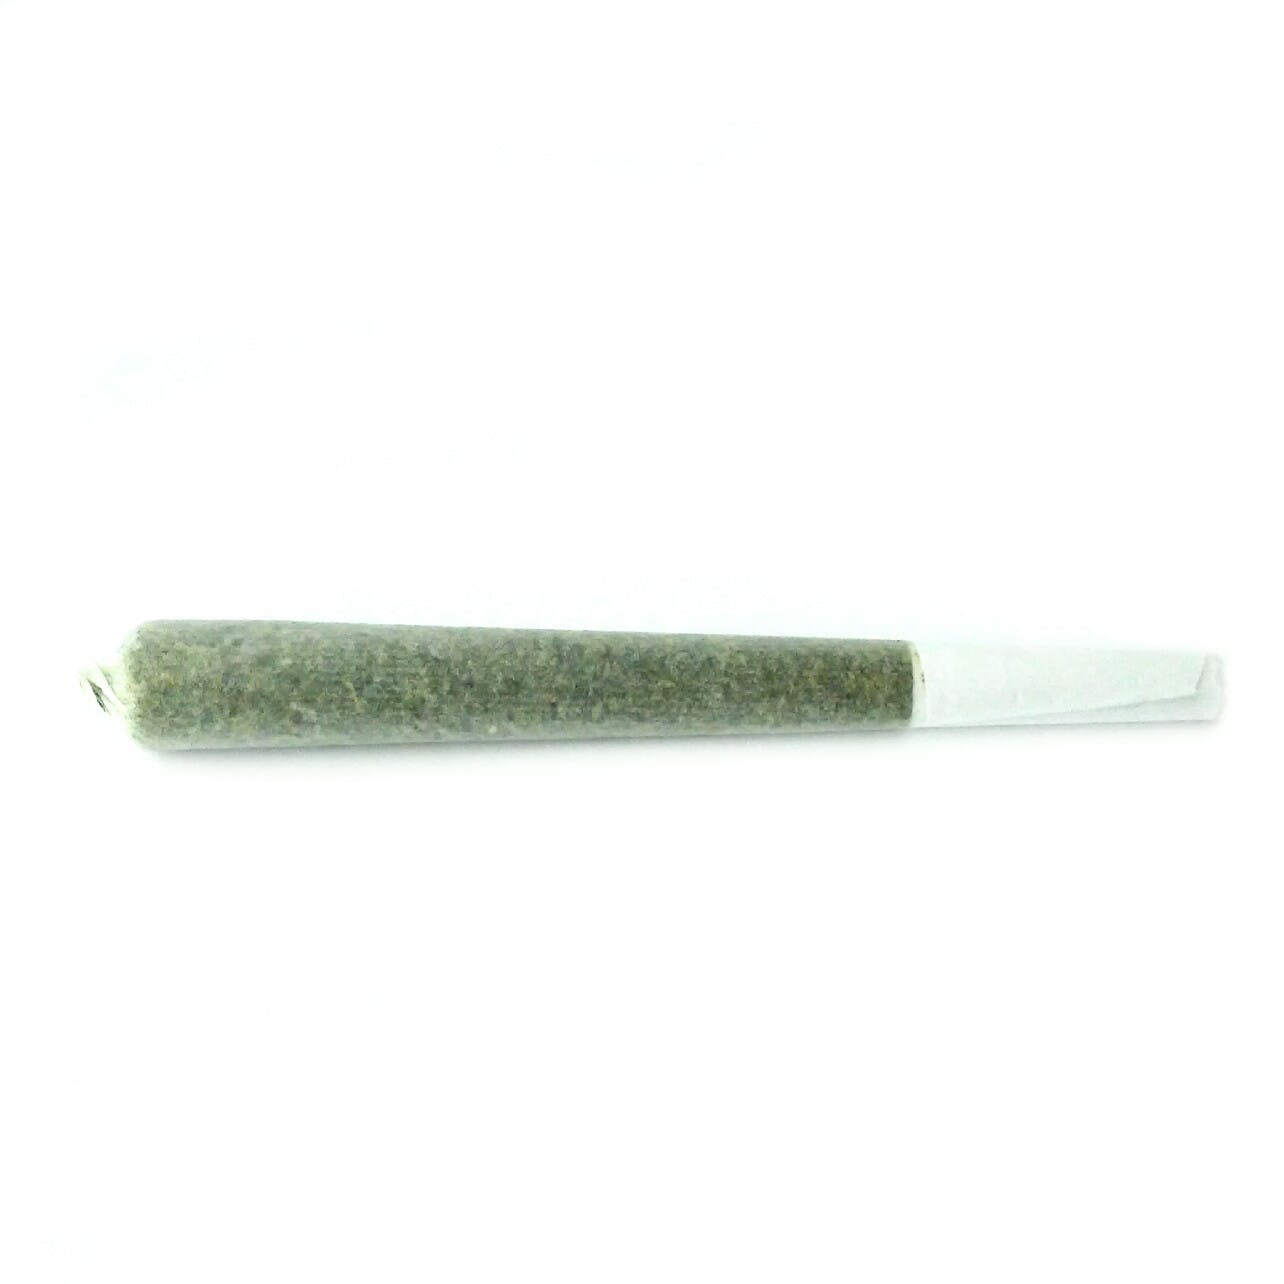 CADILLAC PURPLE 1g Pre-Roll from ALBION FARMS